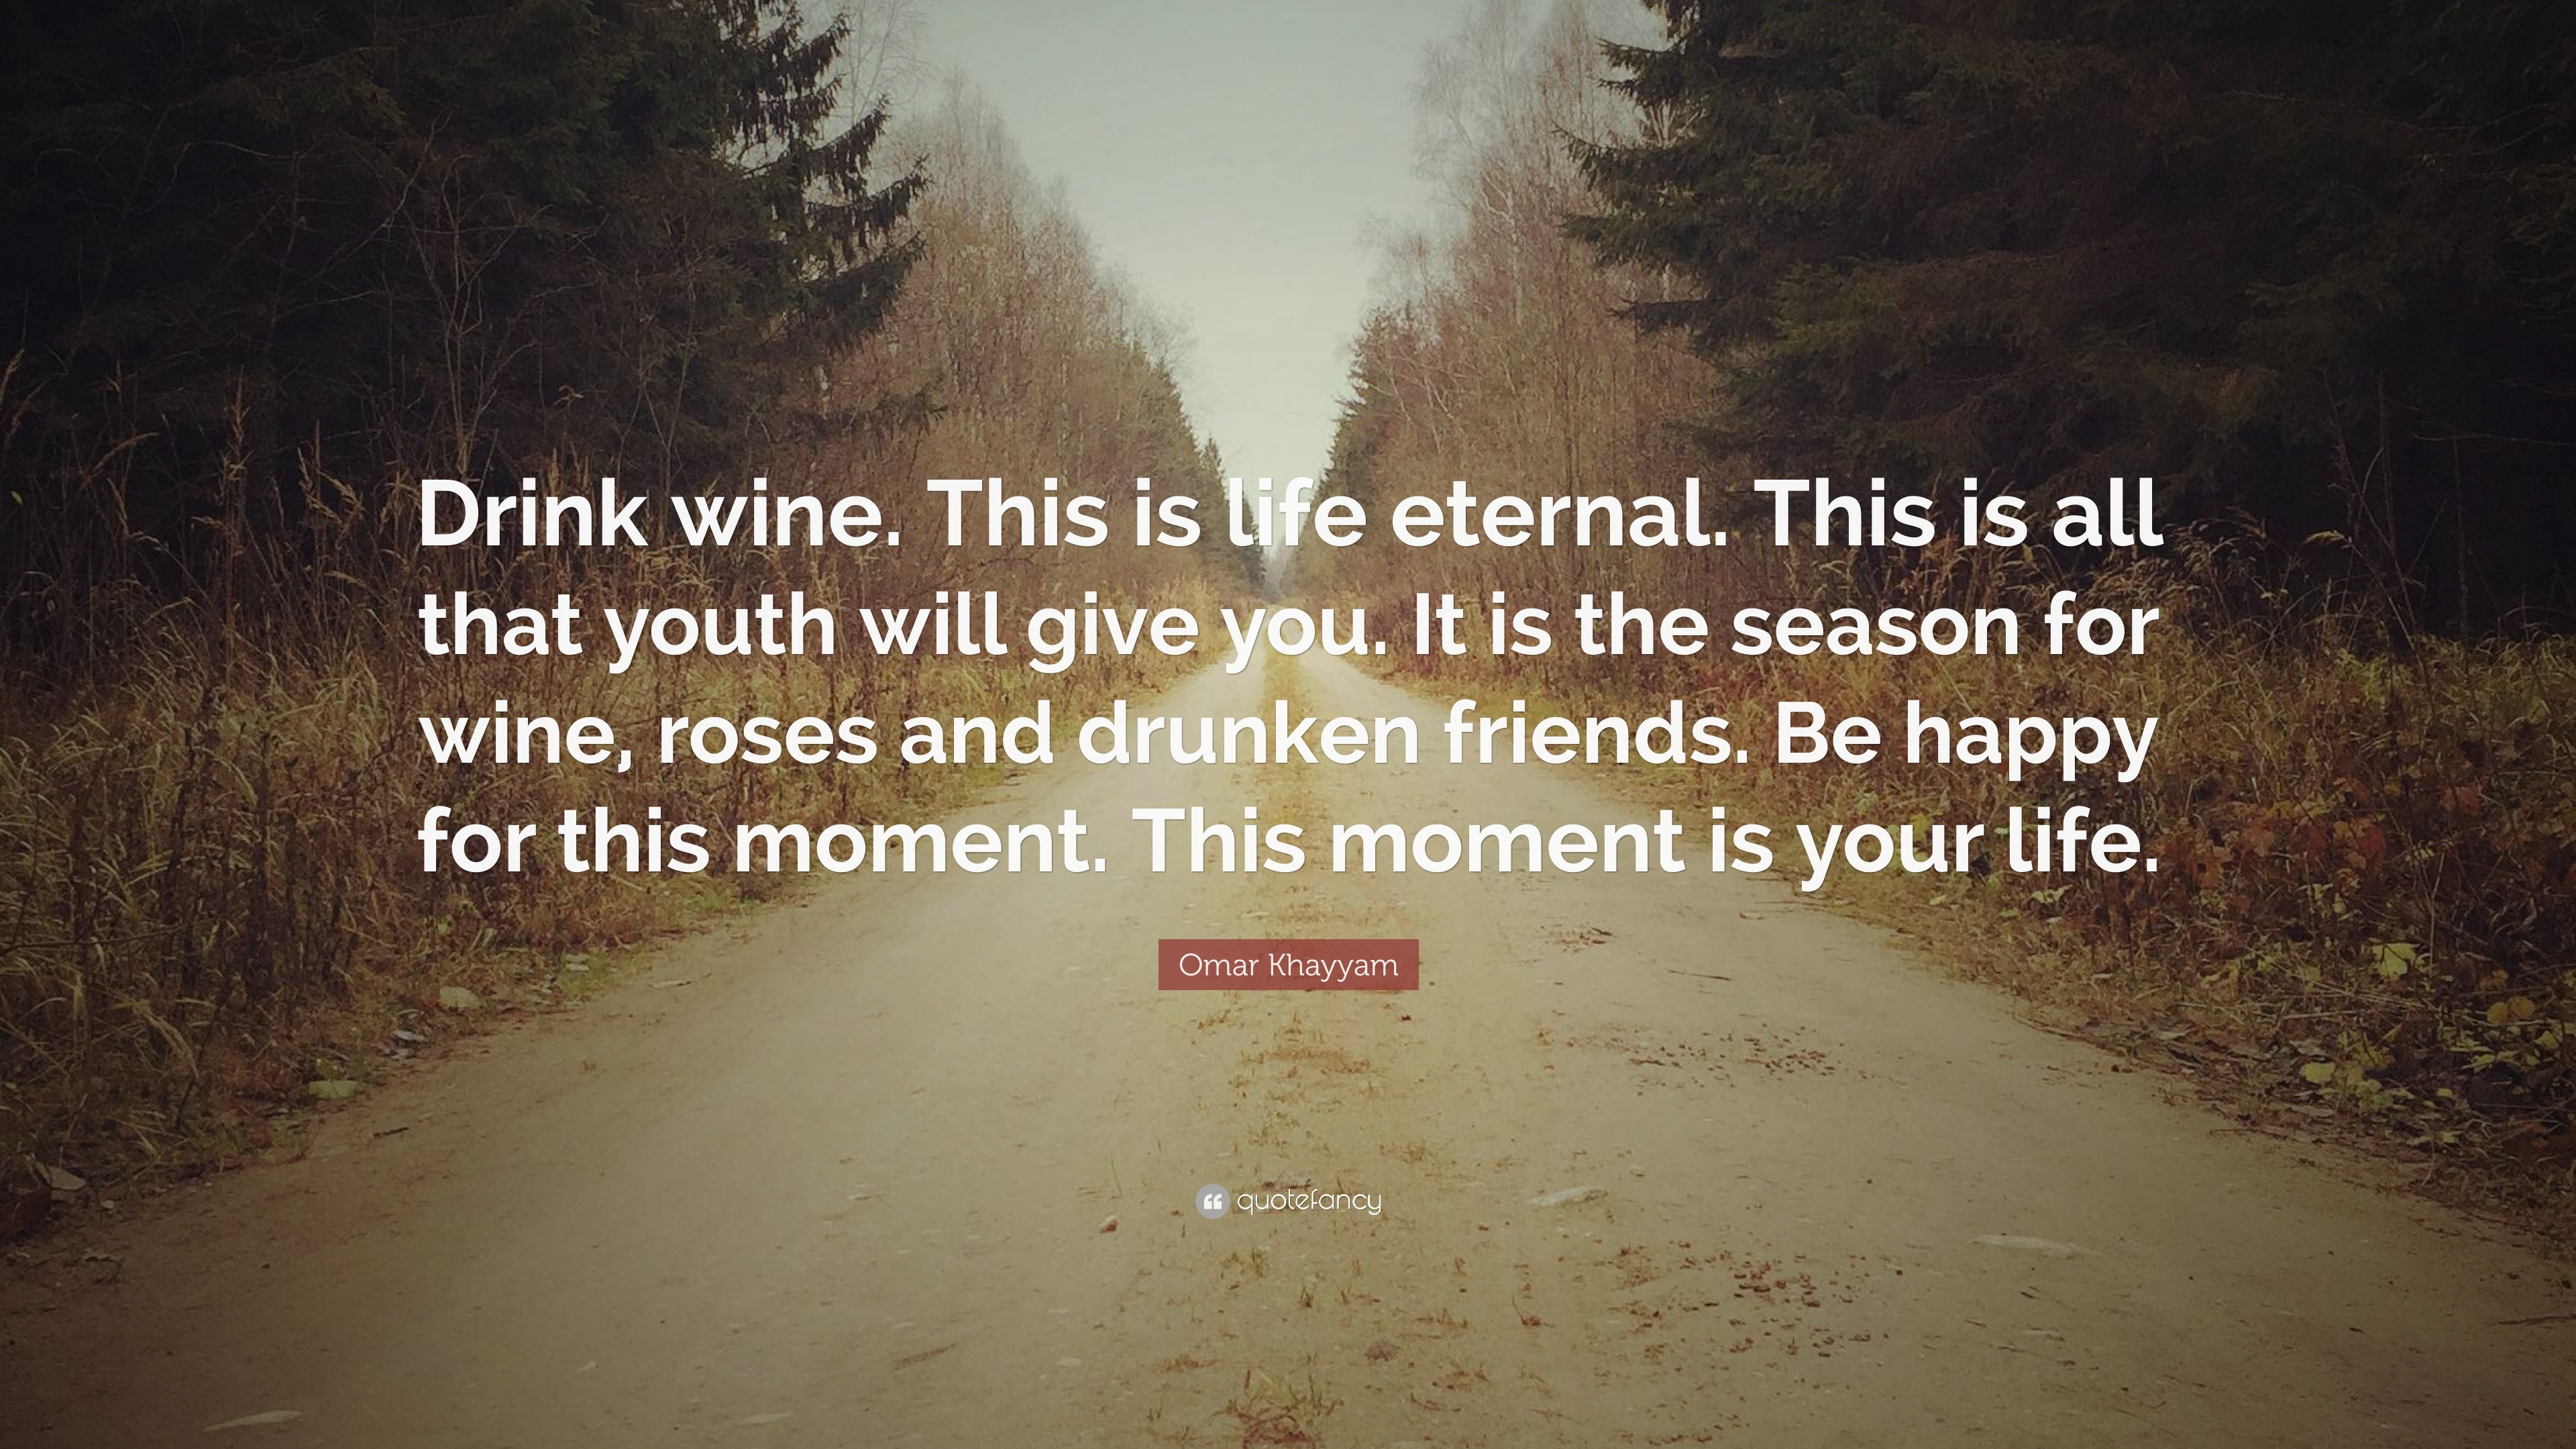 Omar Khayyam Quote “Drink wine This is life eternal This is all